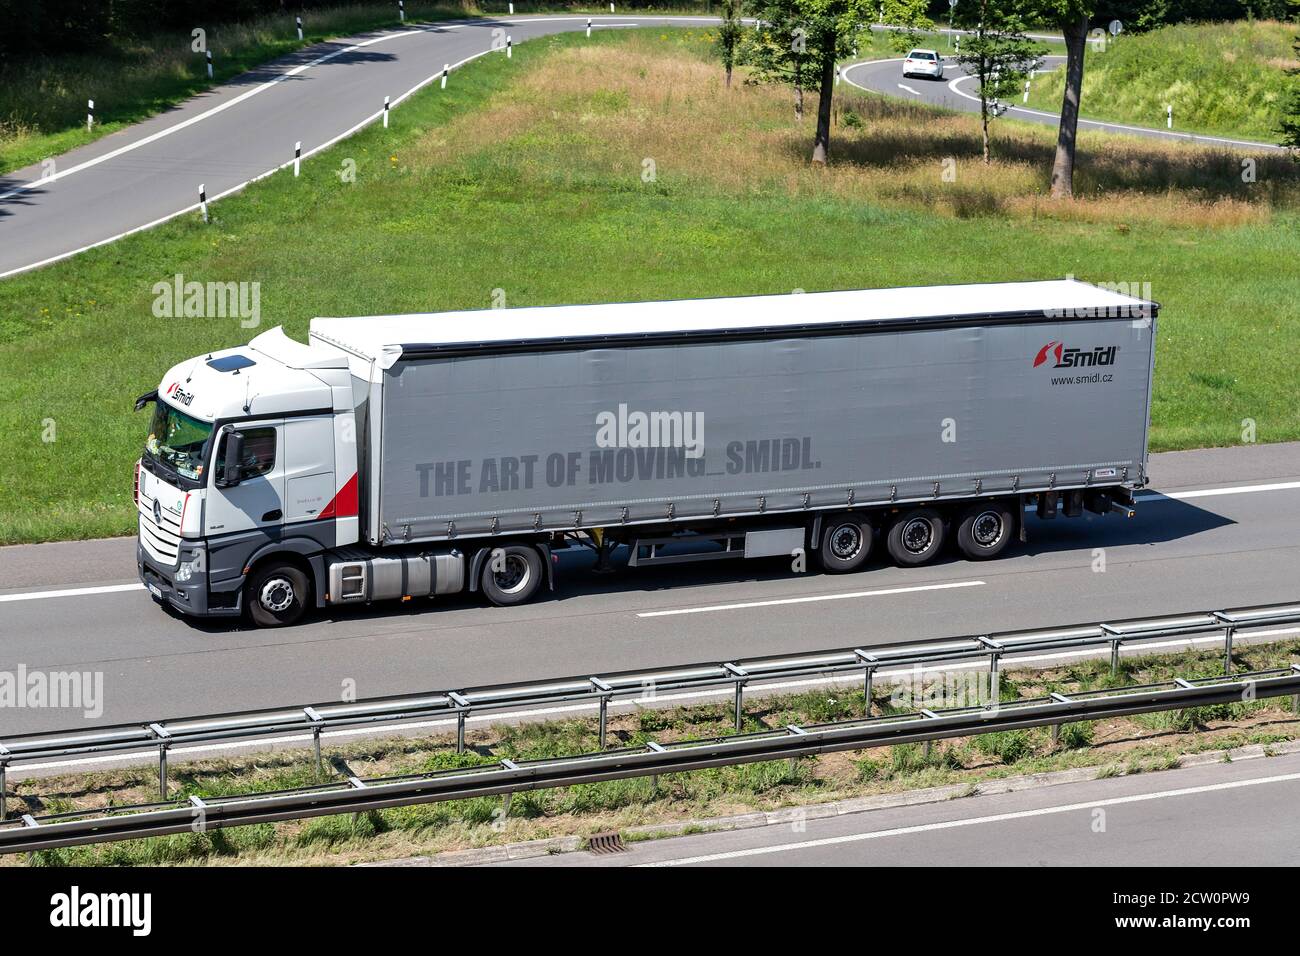 Smidl Mercedes-Benz Actros truck with curtainside trailer on motorway. Stock Photo